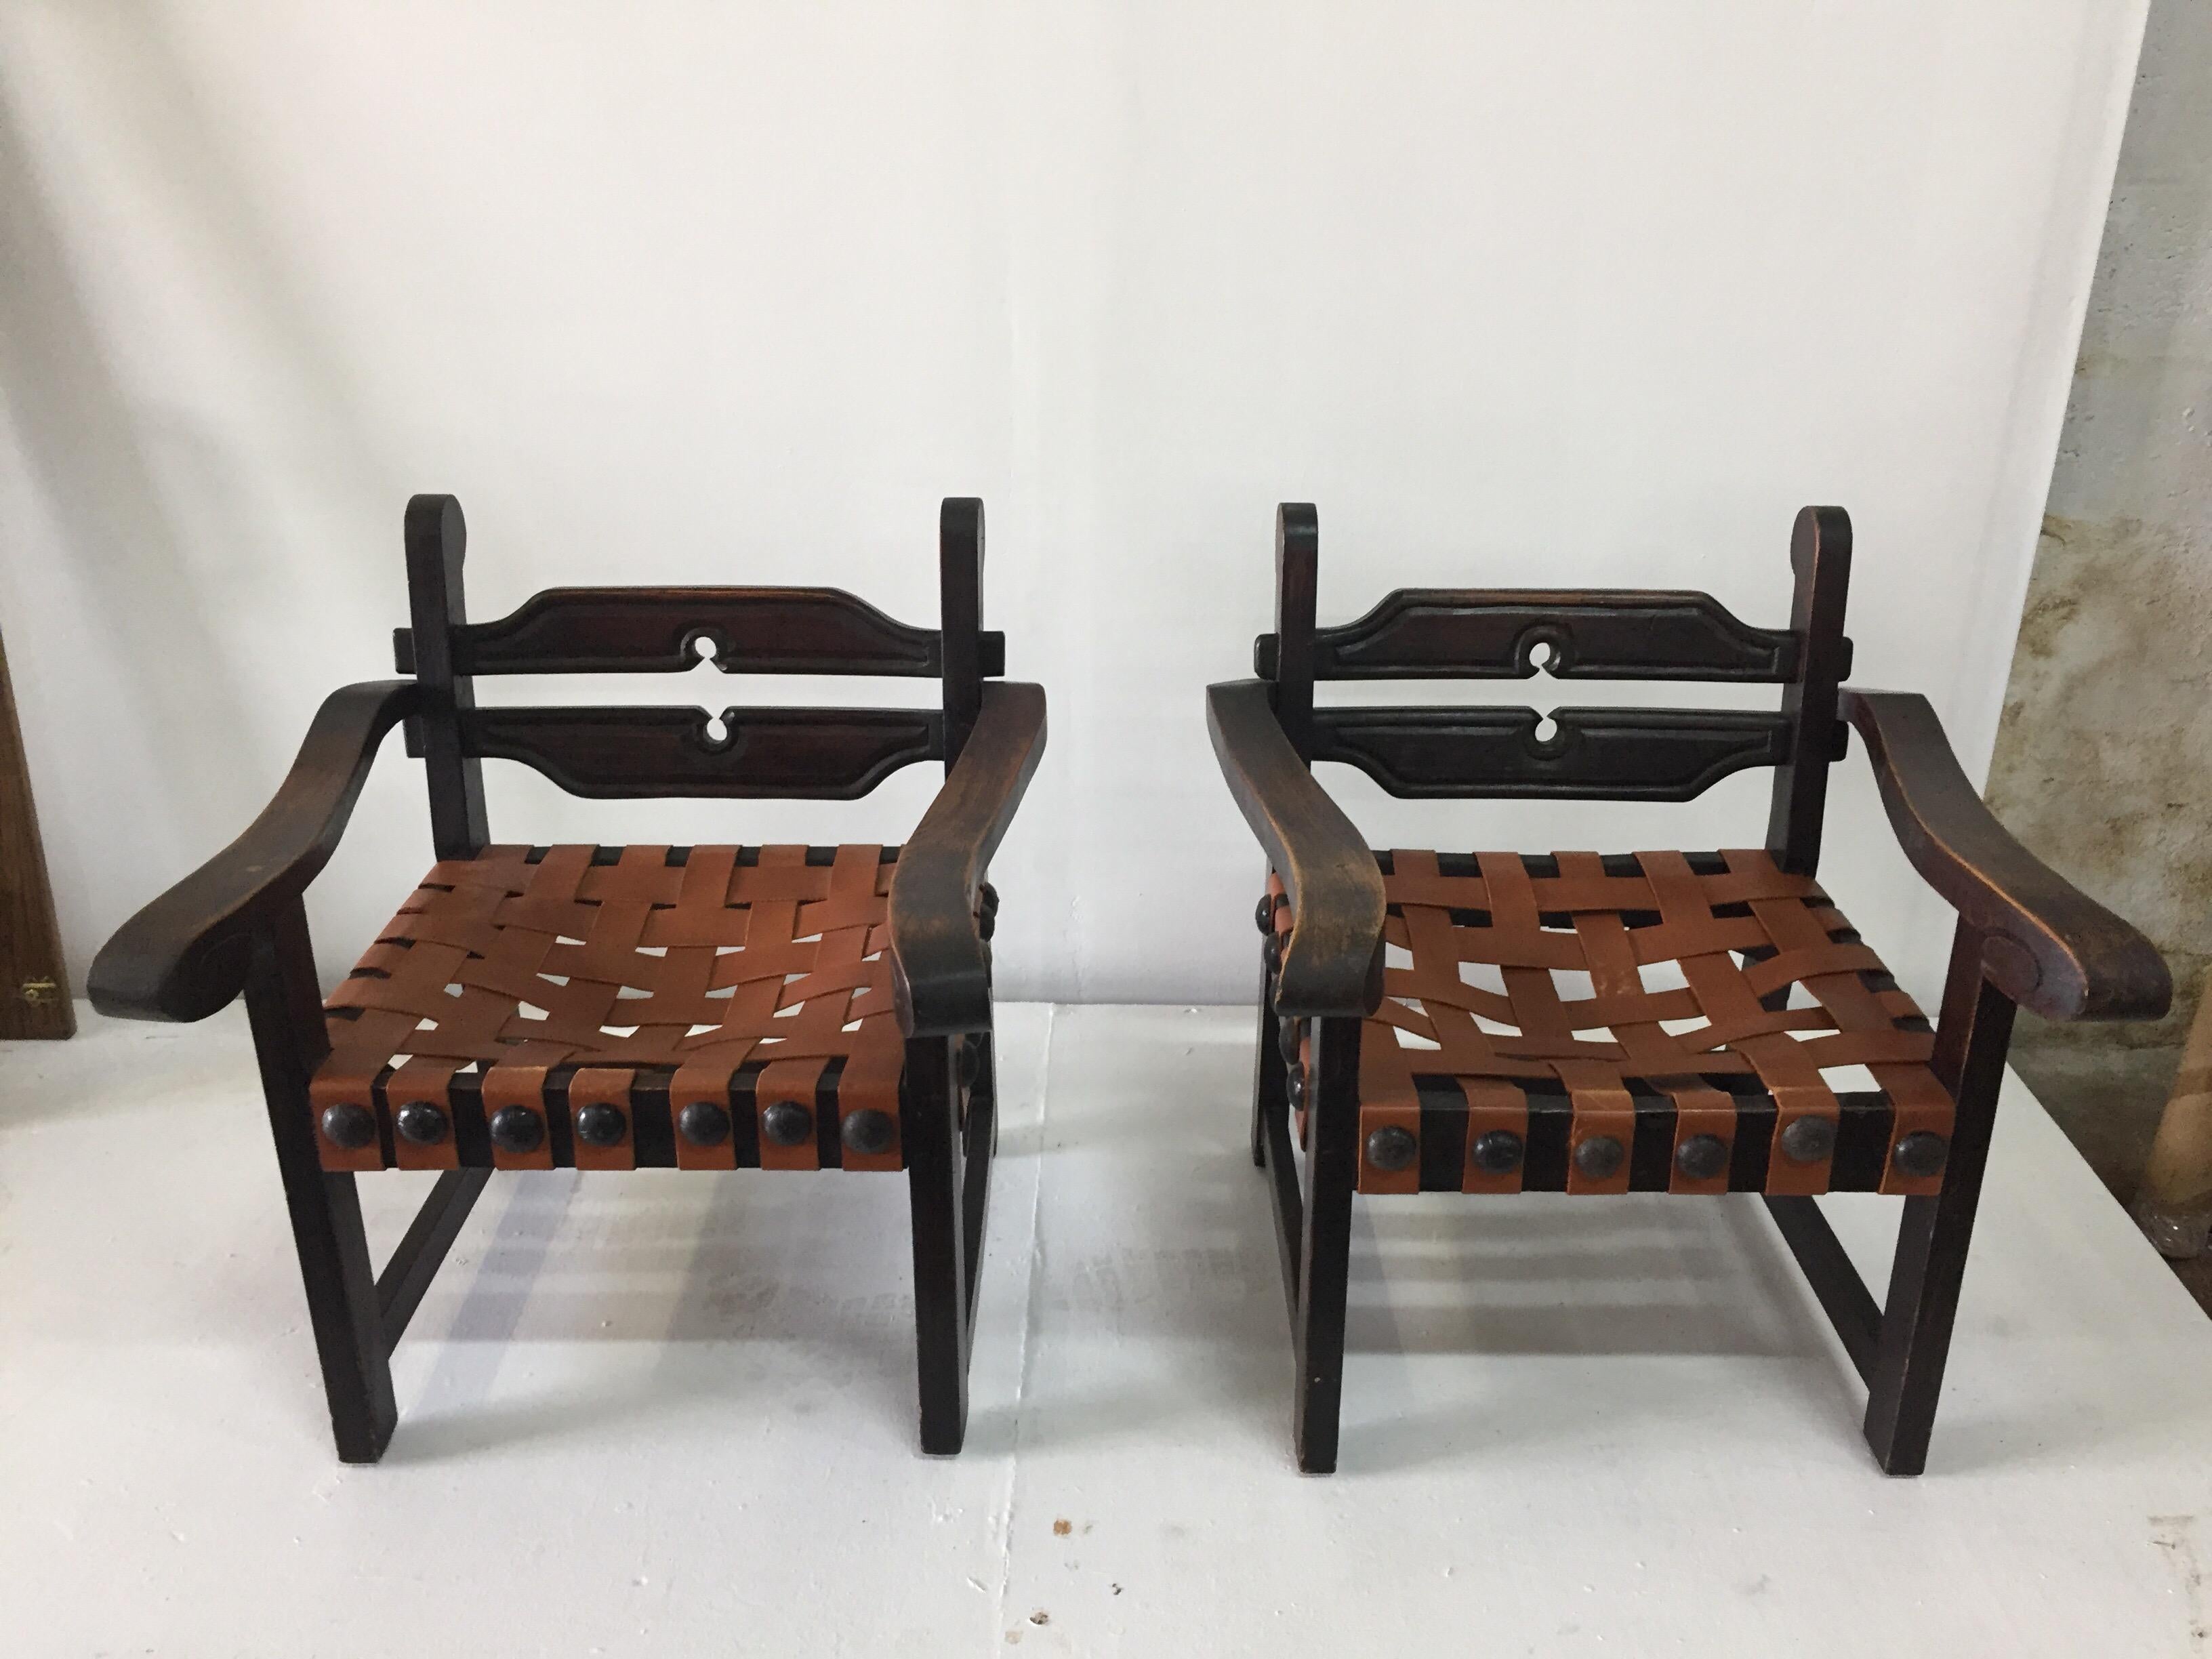 This is a wonderful authentic pair of chairs by the artist and silversmith designer William Spratling, made in his workshop in Taxco in the 40s.  Sabino wood and genuine leather seats, rustic and original hammered metal oversized nail head trim